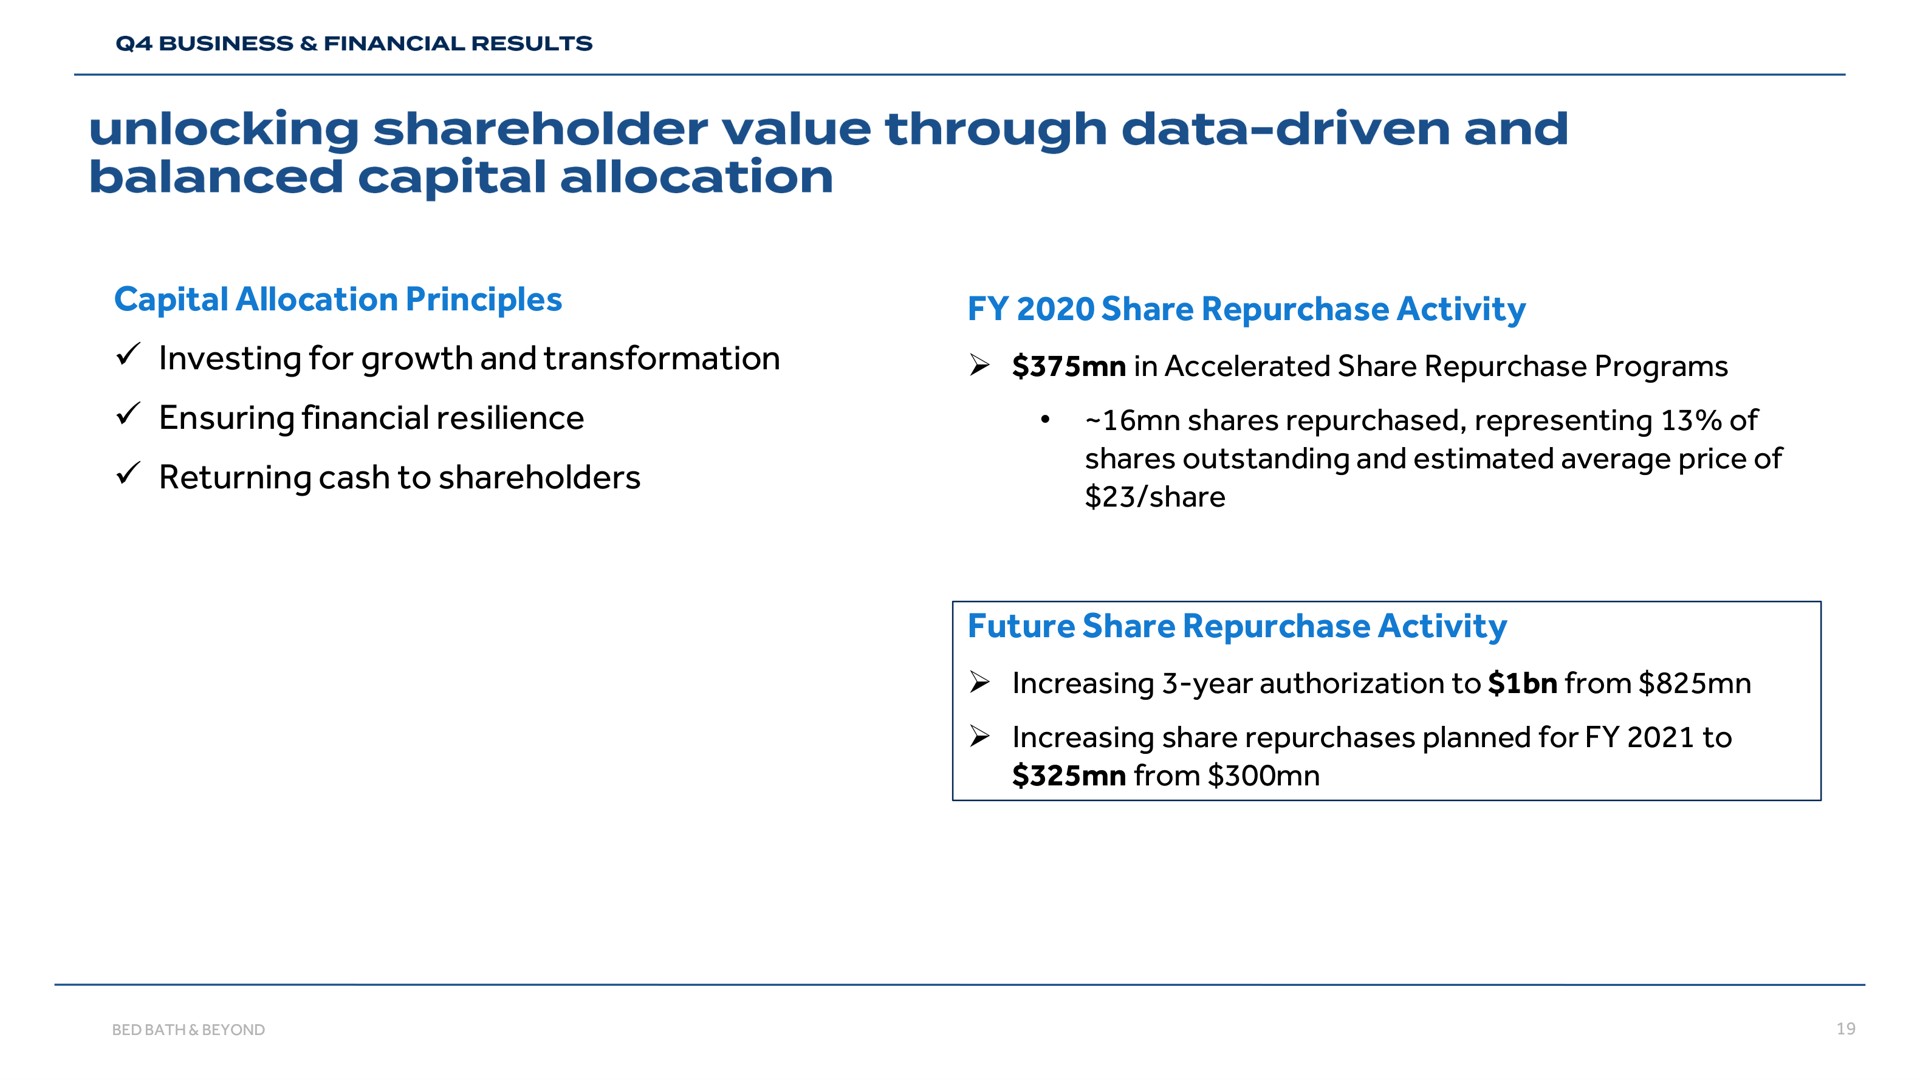 capital allocation principles investing for growth and transformation ensuring financial resilience returning cash to shareholders share repurchase activity in accelerated share repurchase programs shares repurchased representing of shares outstanding and estimated average price of share future share repurchase activity increasing year authorization to from increasing share repurchases planned for to from unlocking shareholder value through data driven balanced | Bed Bath & Beyond